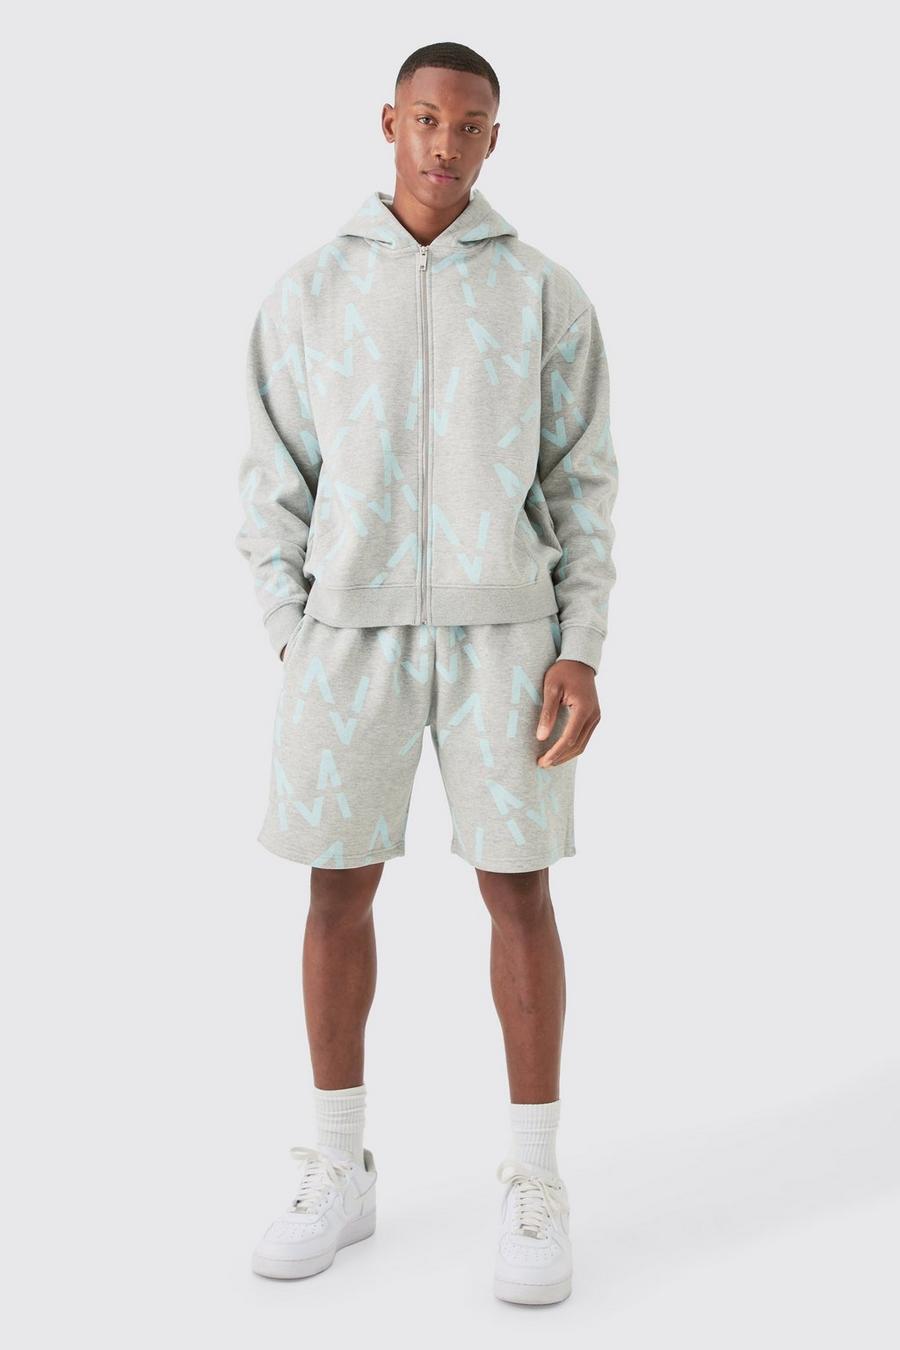 Grey marl  Oversized Boxy Man All Over Print Zip Hoodie Short Tracksuit